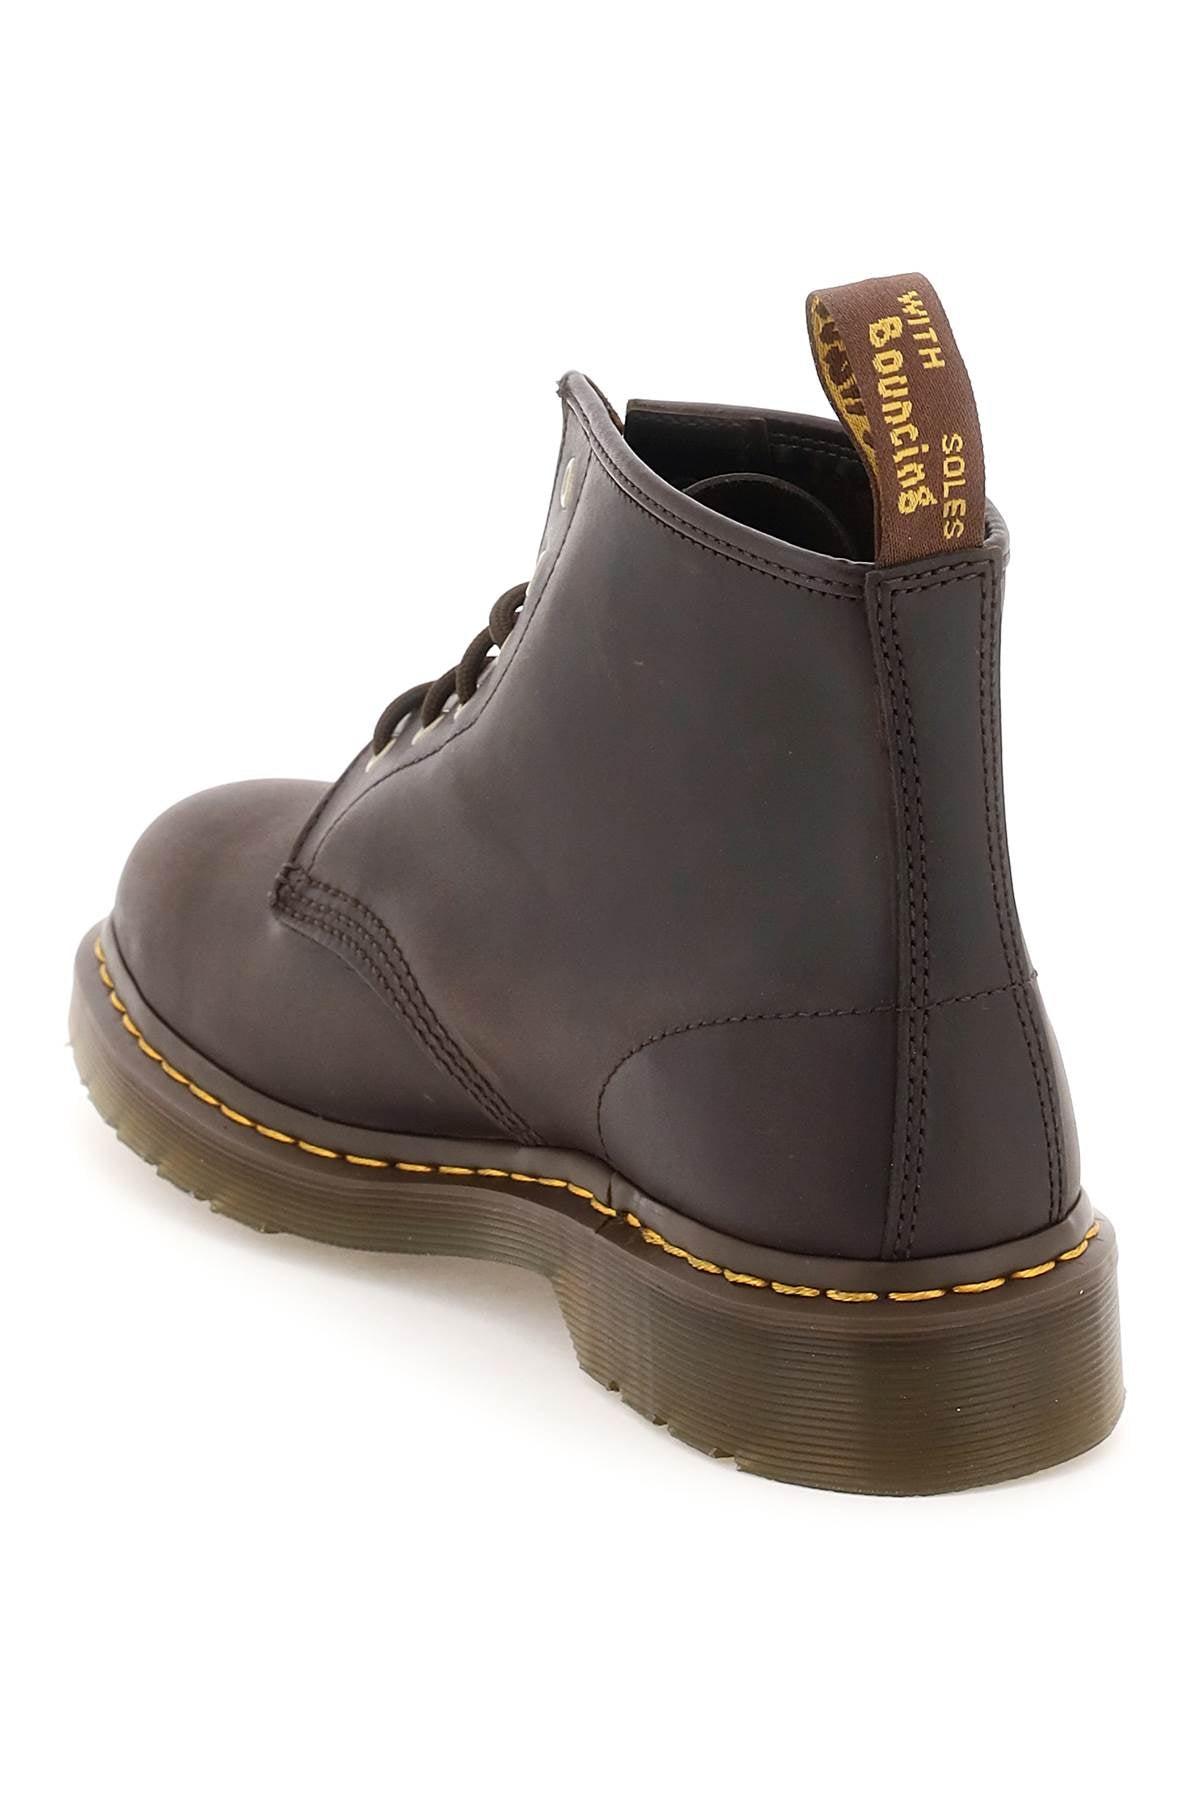 Dr. Martens Leather Crazy Horse 101 Lace-up Combat Boots in Dark Brown  (Brown) for Men - Save 15% | Lyst